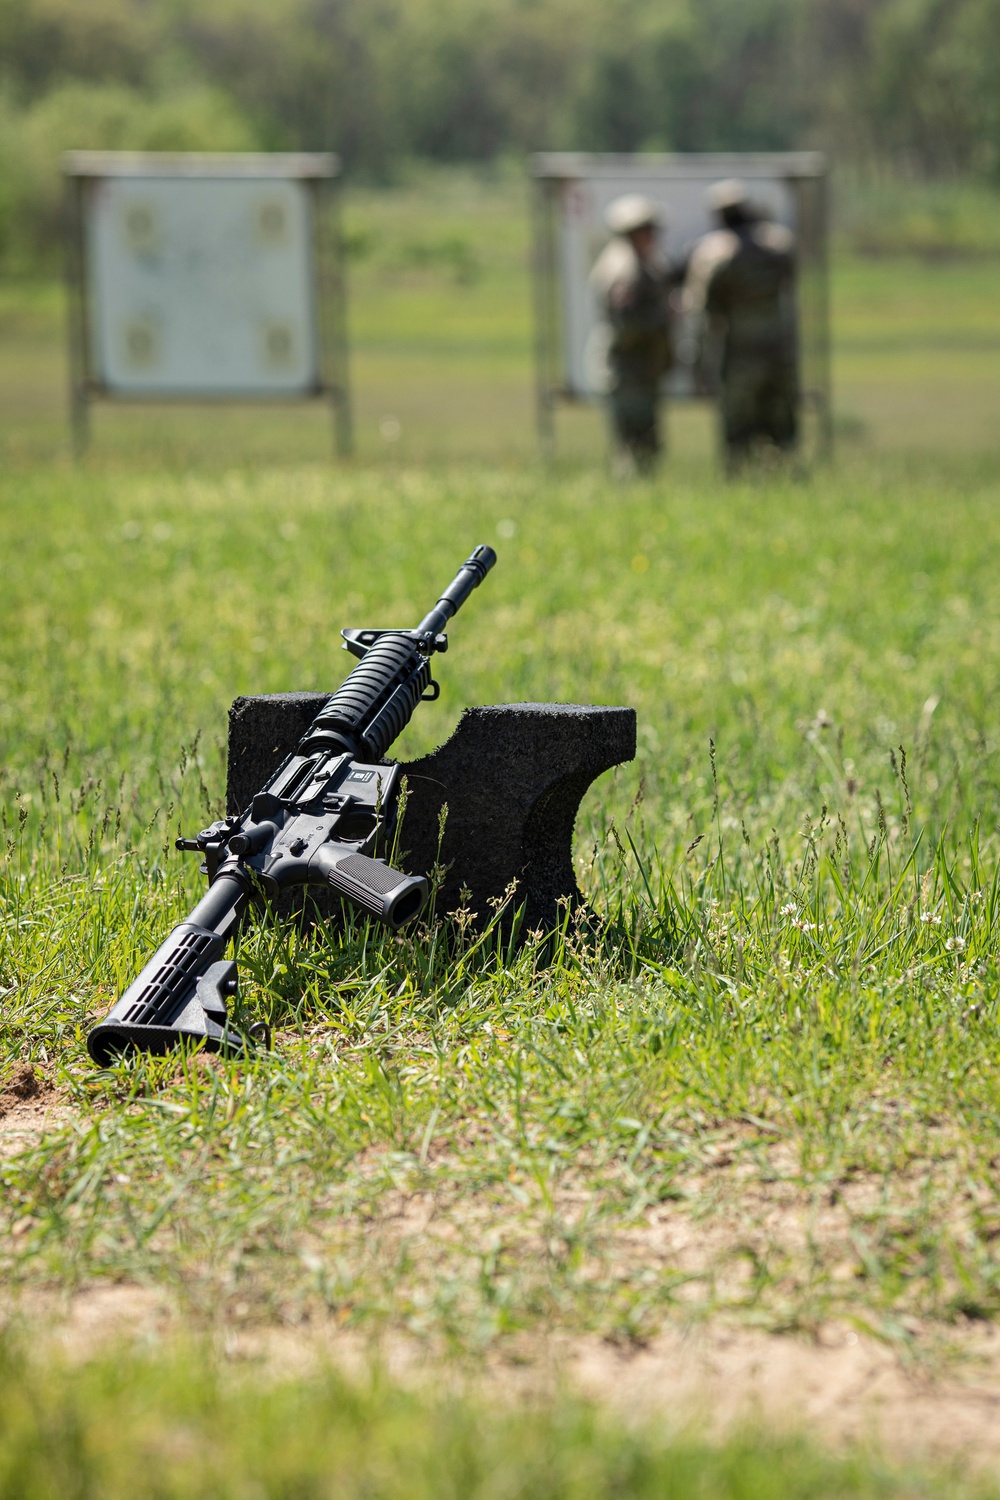 Safe and cleared to go downrange